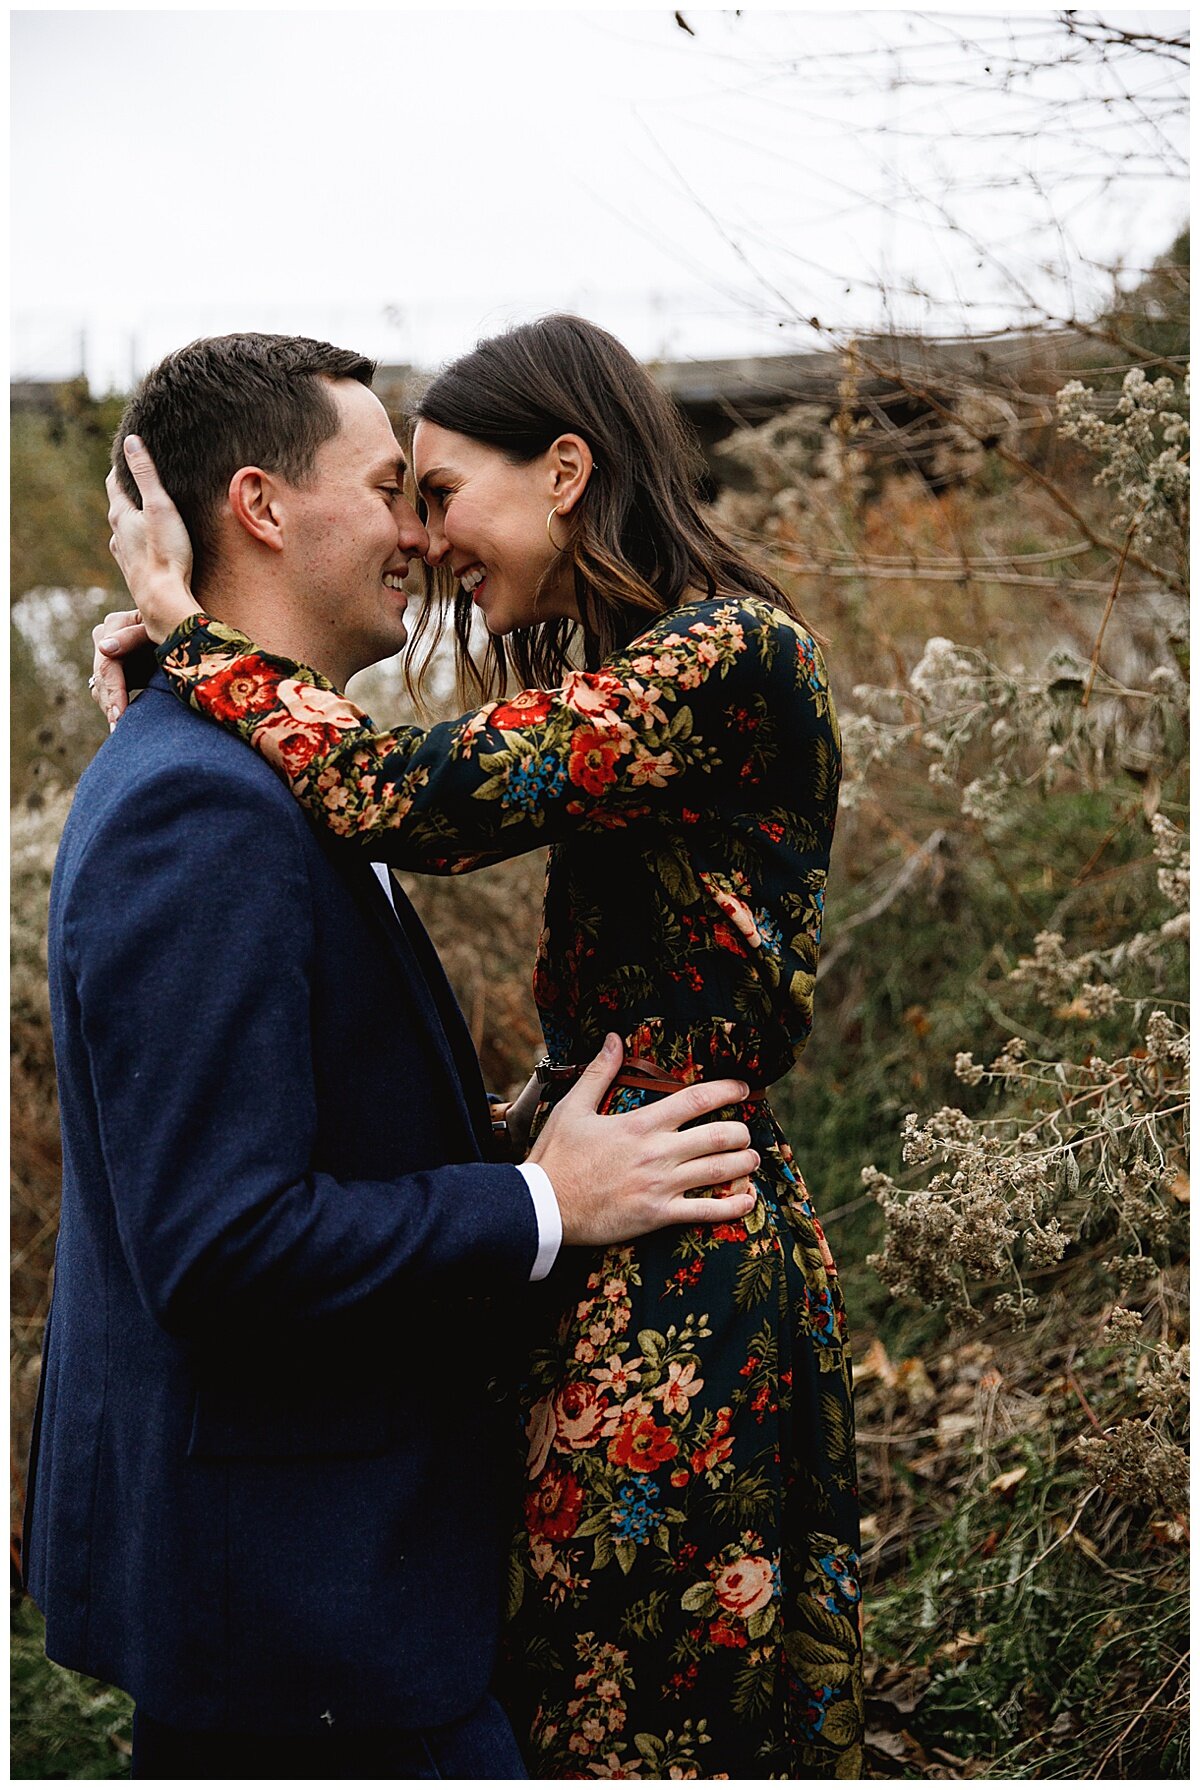  nature + city fall engagement session milwaukee wi - chelsea matson photography 